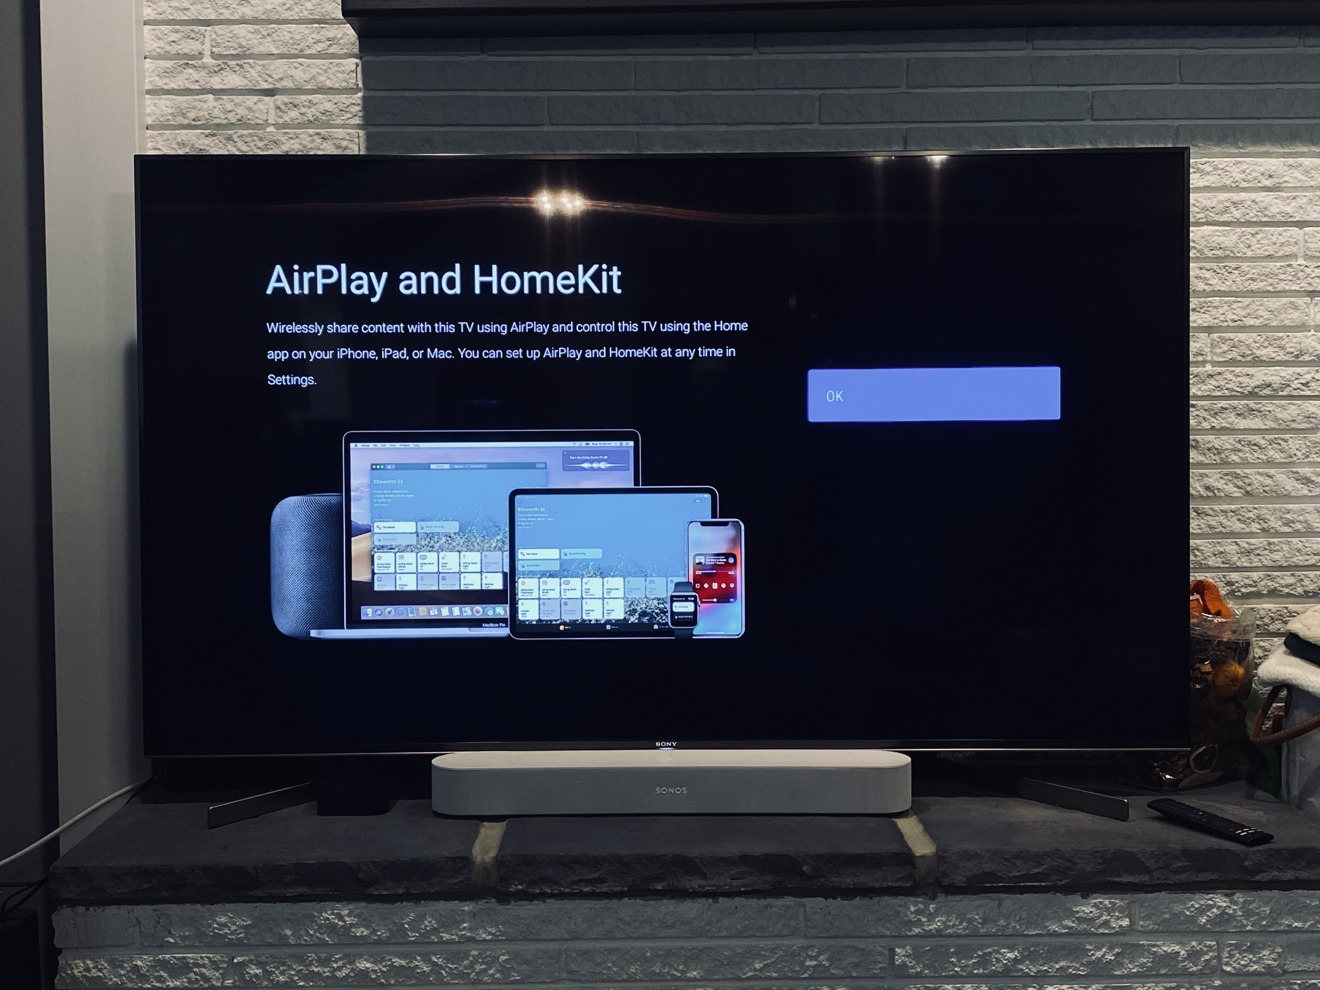 Hot And Airplay 2 On Sony Smart Tvs, How To Screen Mirror Between Iphone And Sony Tv